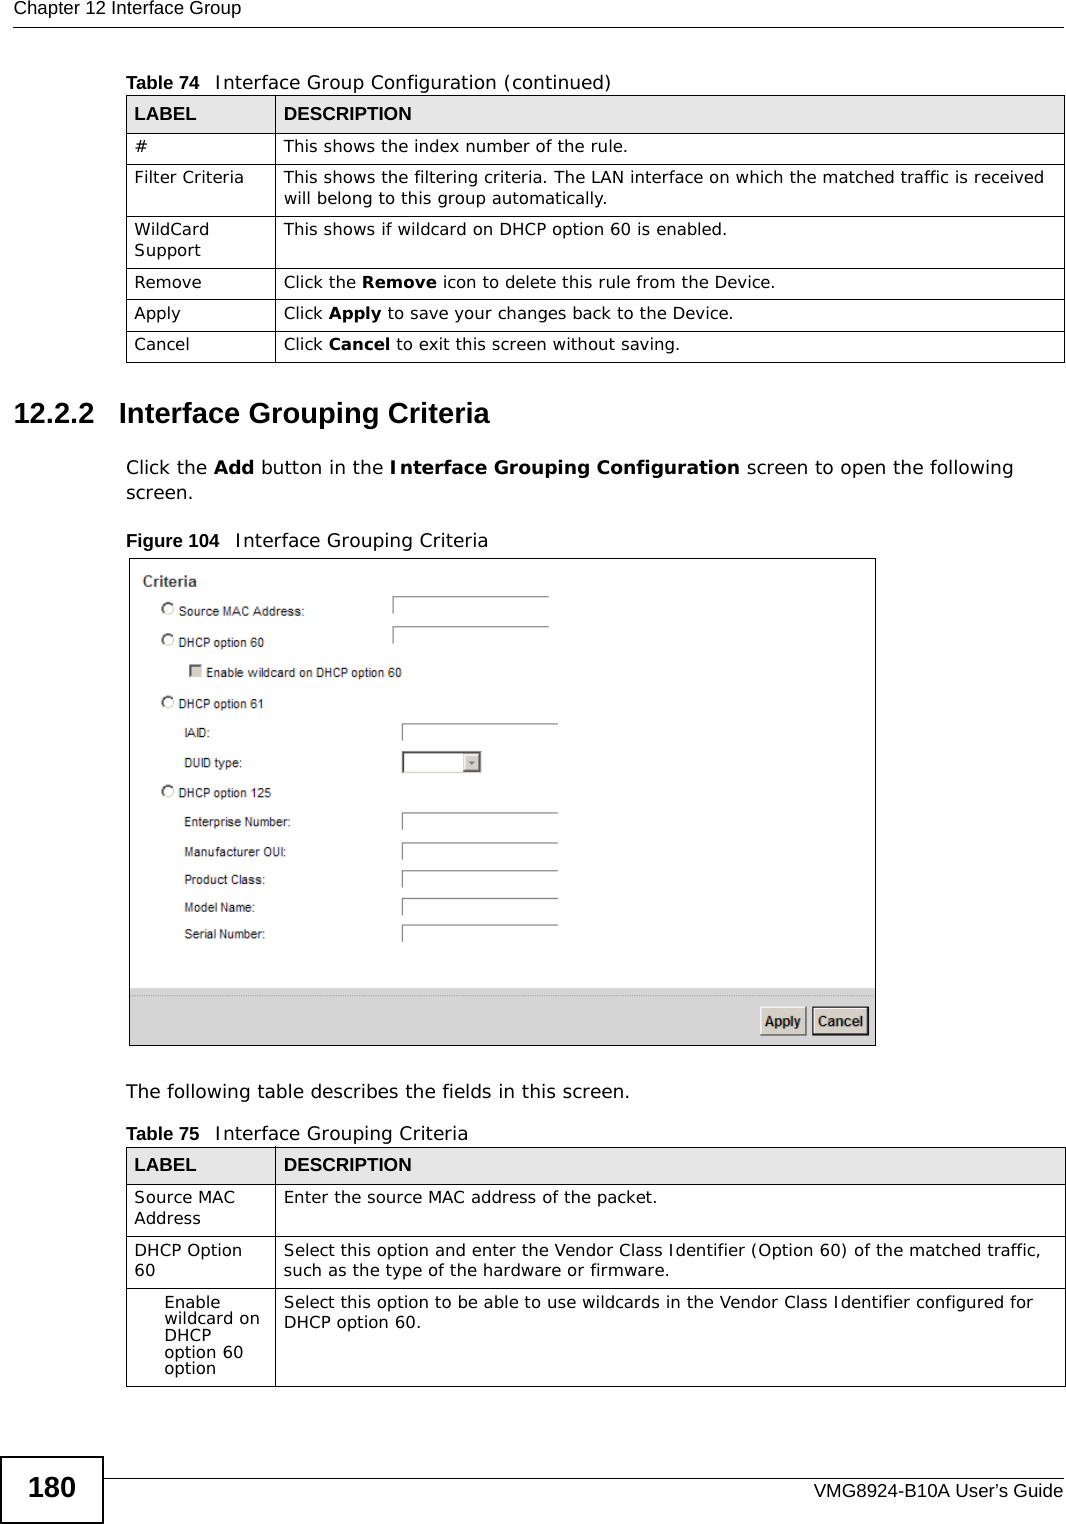 Chapter 12 Interface GroupVMG8924-B10A User’s Guide18012.2.2   Interface Grouping CriteriaClick the Add button in the Interface Grouping Configuration screen to open the following screen.Figure 104   Interface Grouping Criteria The following table describes the fields in this screen. #This shows the index number of the rule.Filter Criteria This shows the filtering criteria. The LAN interface on which the matched traffic is received will belong to this group automatically.WildCard Support This shows if wildcard on DHCP option 60 is enabled.Remove Click the Remove icon to delete this rule from the Device.Apply Click Apply to save your changes back to the Device.Cancel Click Cancel to exit this screen without saving.Table 74   Interface Group Configuration (continued)LABEL DESCRIPTIONTable 75   Interface Grouping CriteriaLABEL DESCRIPTIONSource MAC Address Enter the source MAC address of the packet.DHCP Option 60 Select this option and enter the Vendor Class Identifier (Option 60) of the matched traffic, such as the type of the hardware or firmware.Enable wildcard on DHCP option 60 optionSelect this option to be able to use wildcards in the Vendor Class Identifier configured for DHCP option 60.